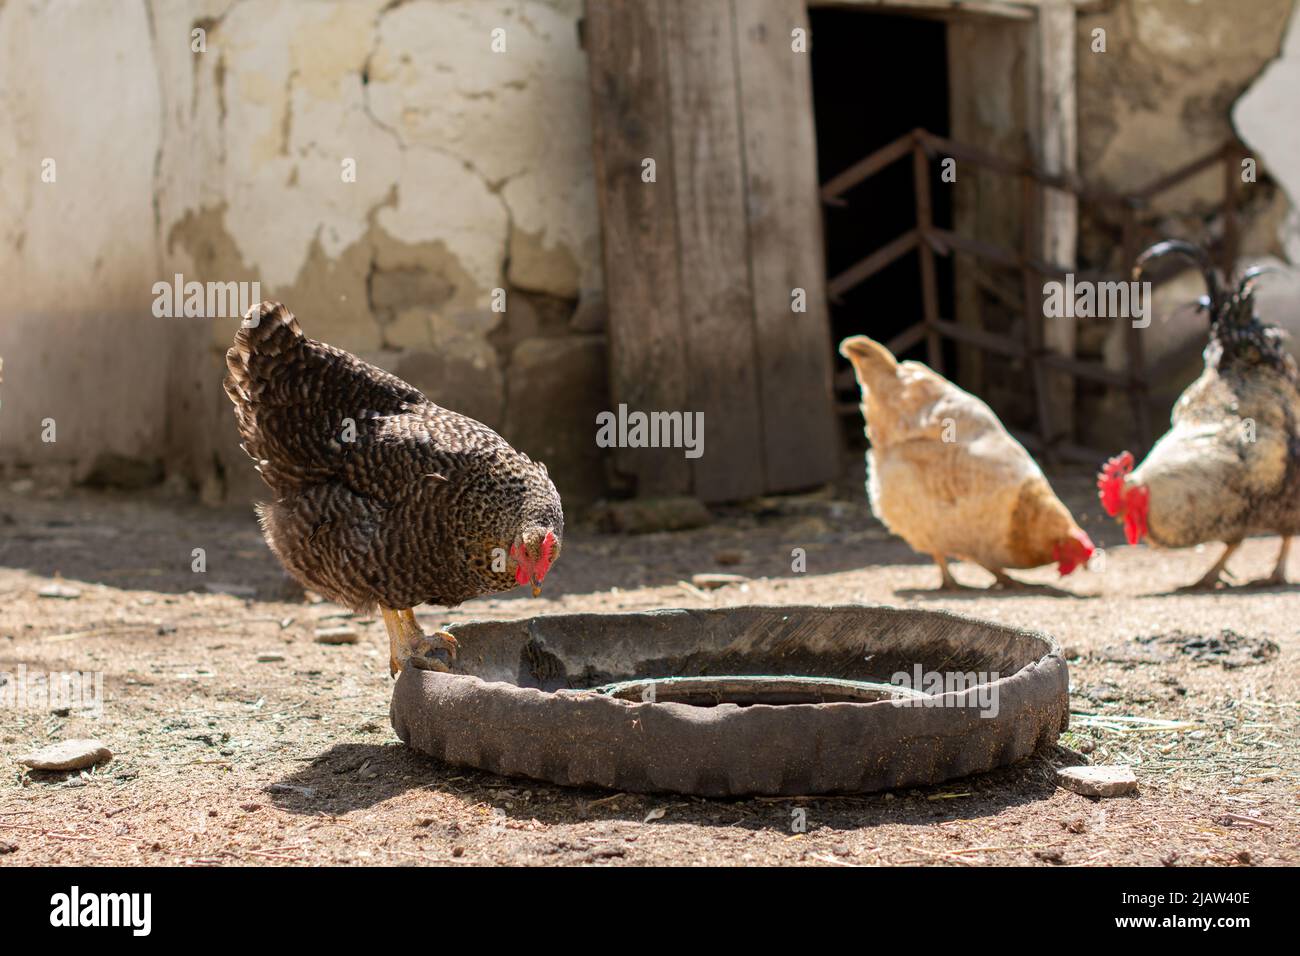 The Barred Plymouth Rock is standing on the edge of a poultry waterer. Stock Photo